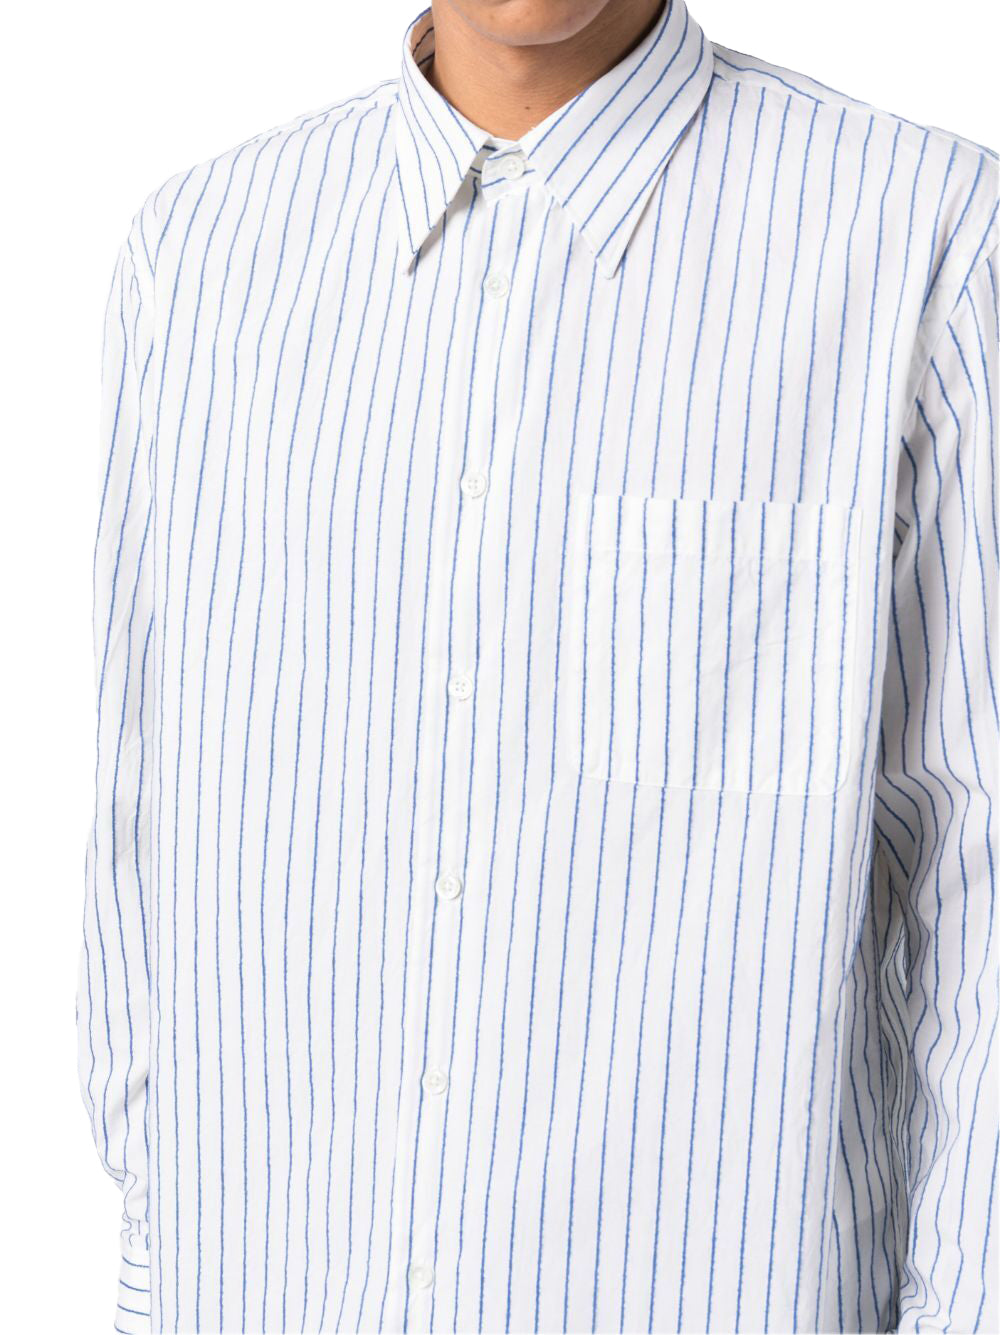 Spacey SS striped shirt